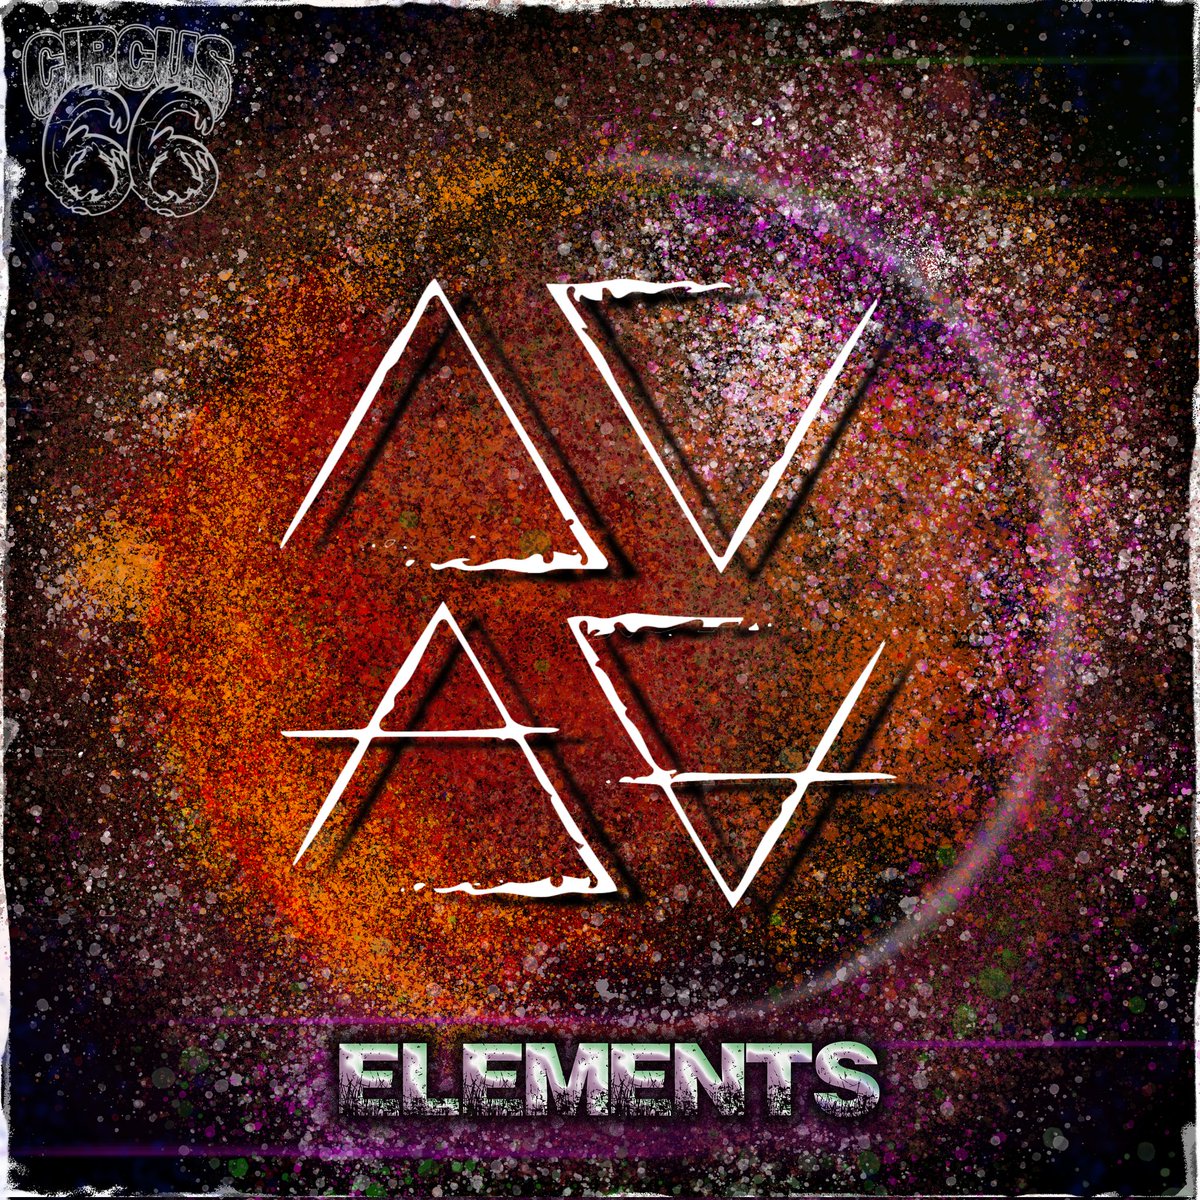 #elements available to pre-order @ circus66.com is the second studio album - order now!